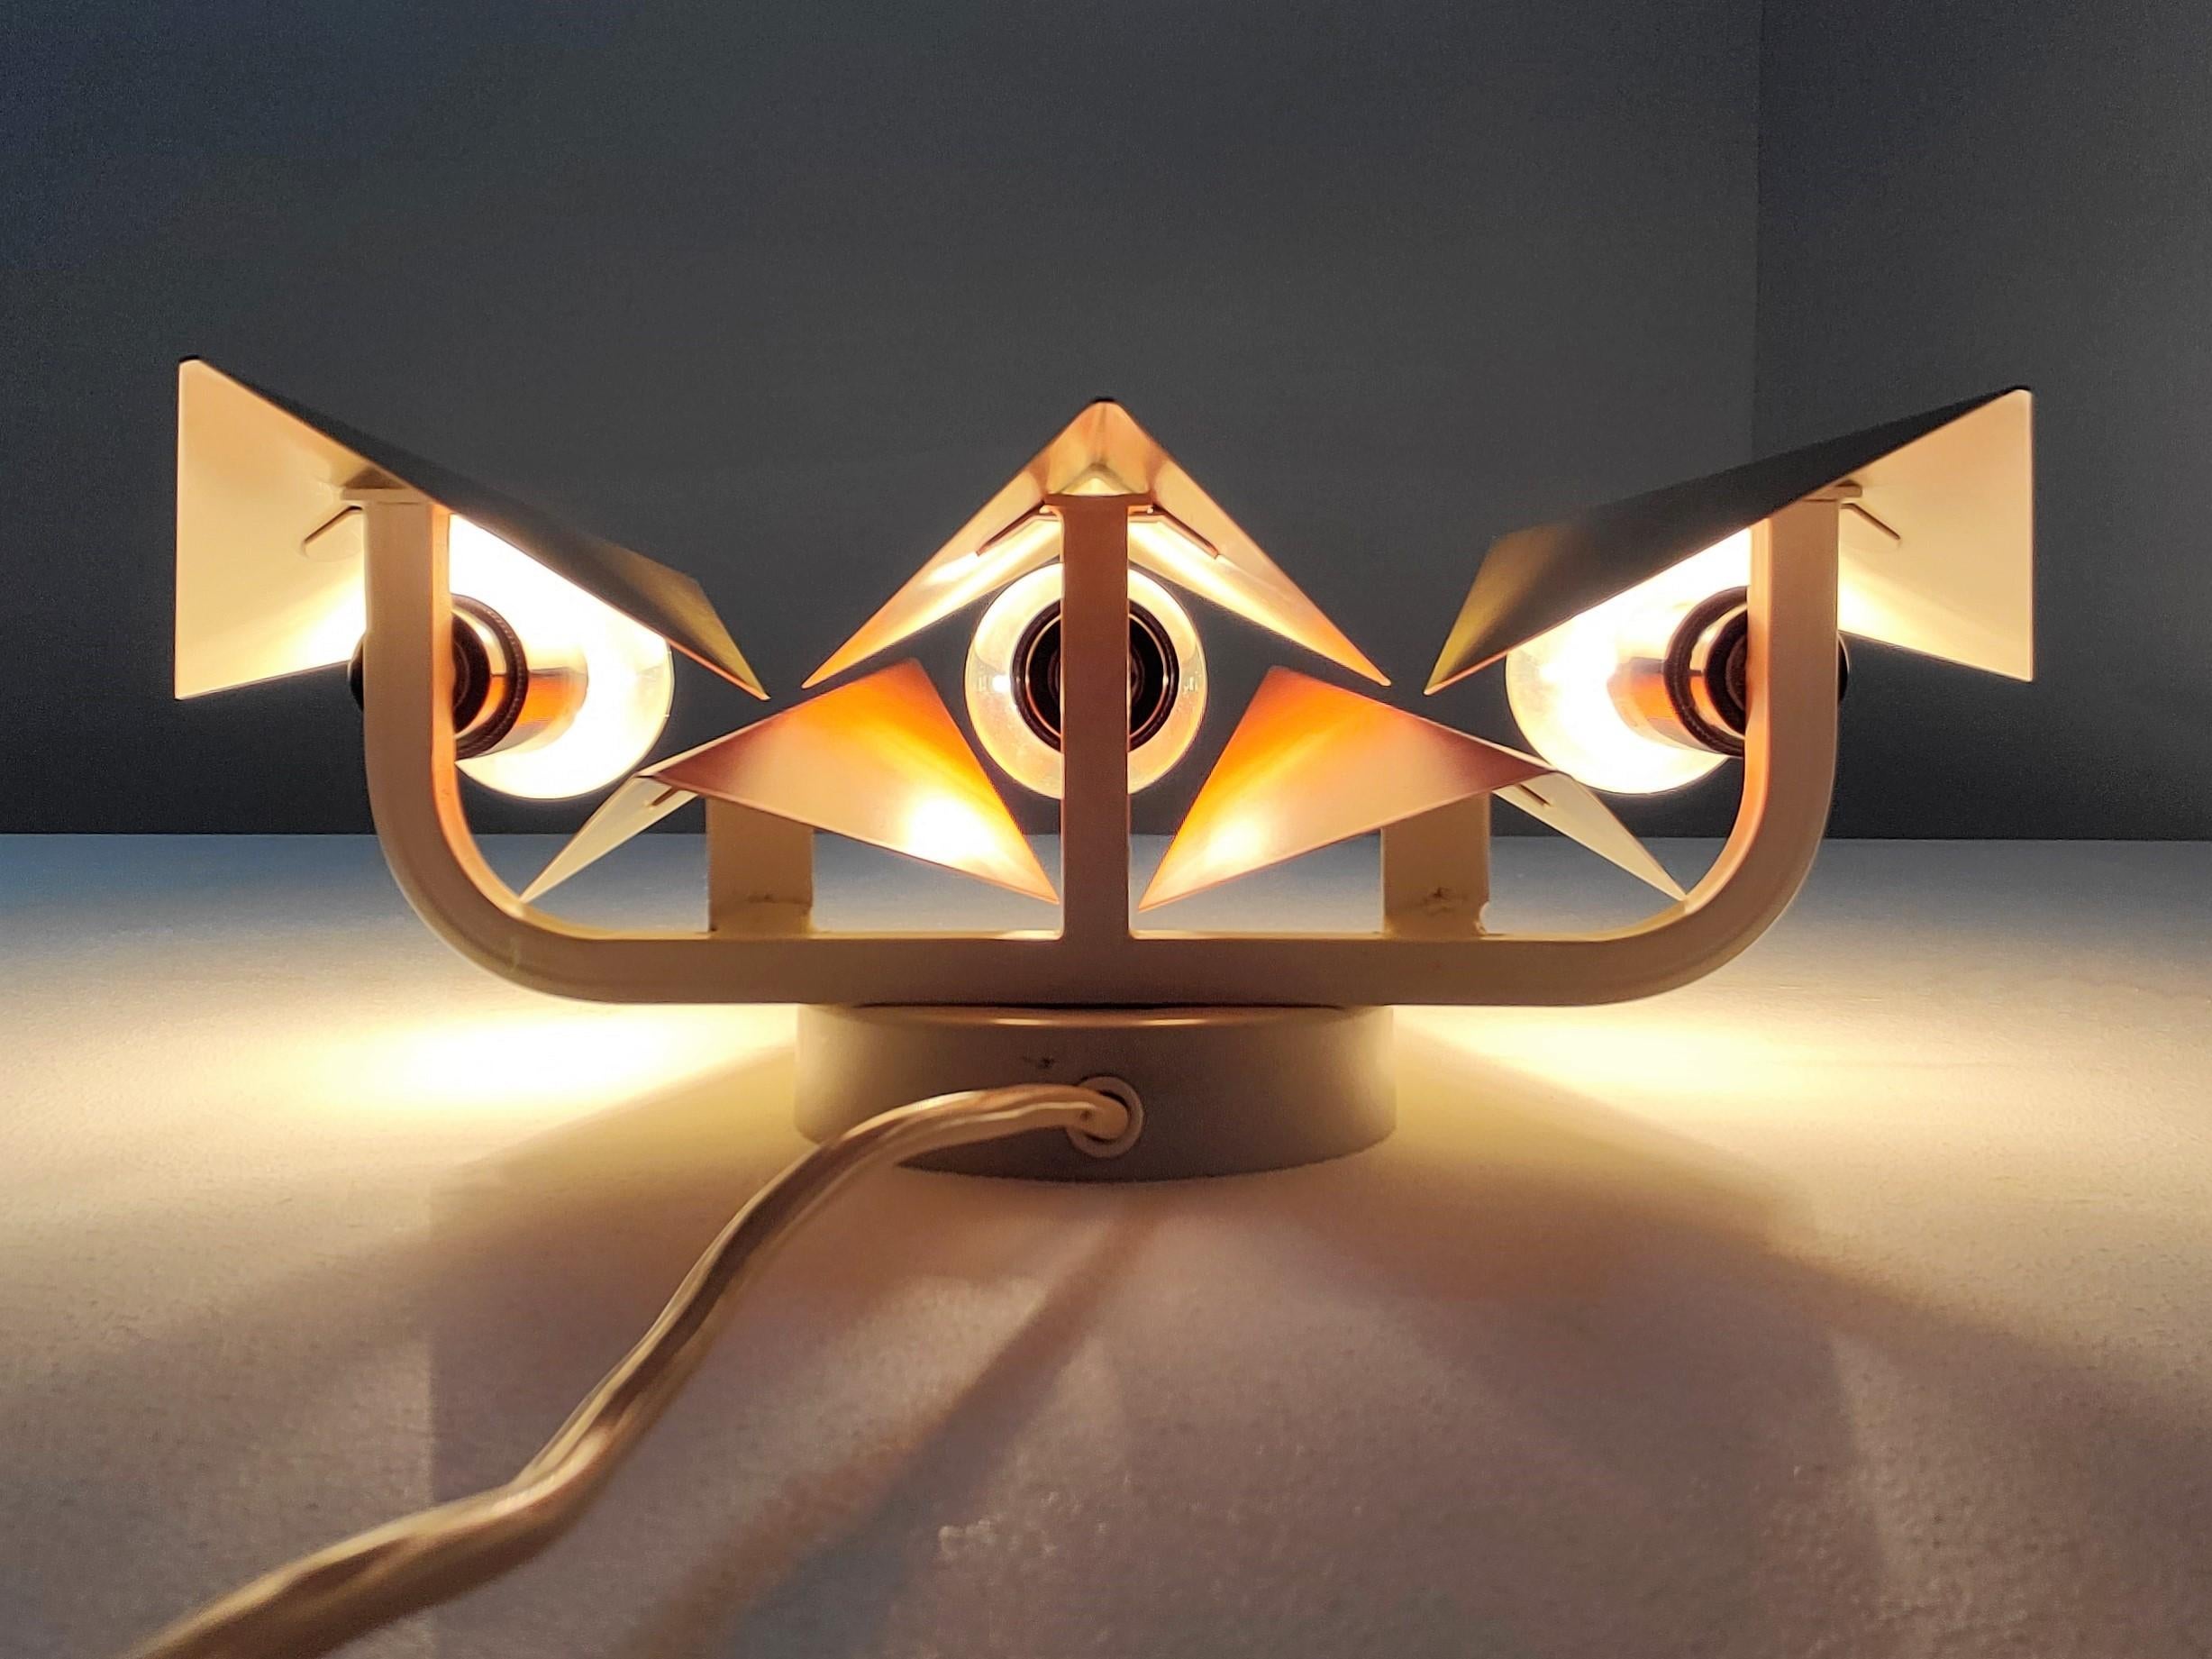 Diamond Shaped Wall Lamp by Svend Aage & Holm Sørensen for Holm Sørensen & Co 1